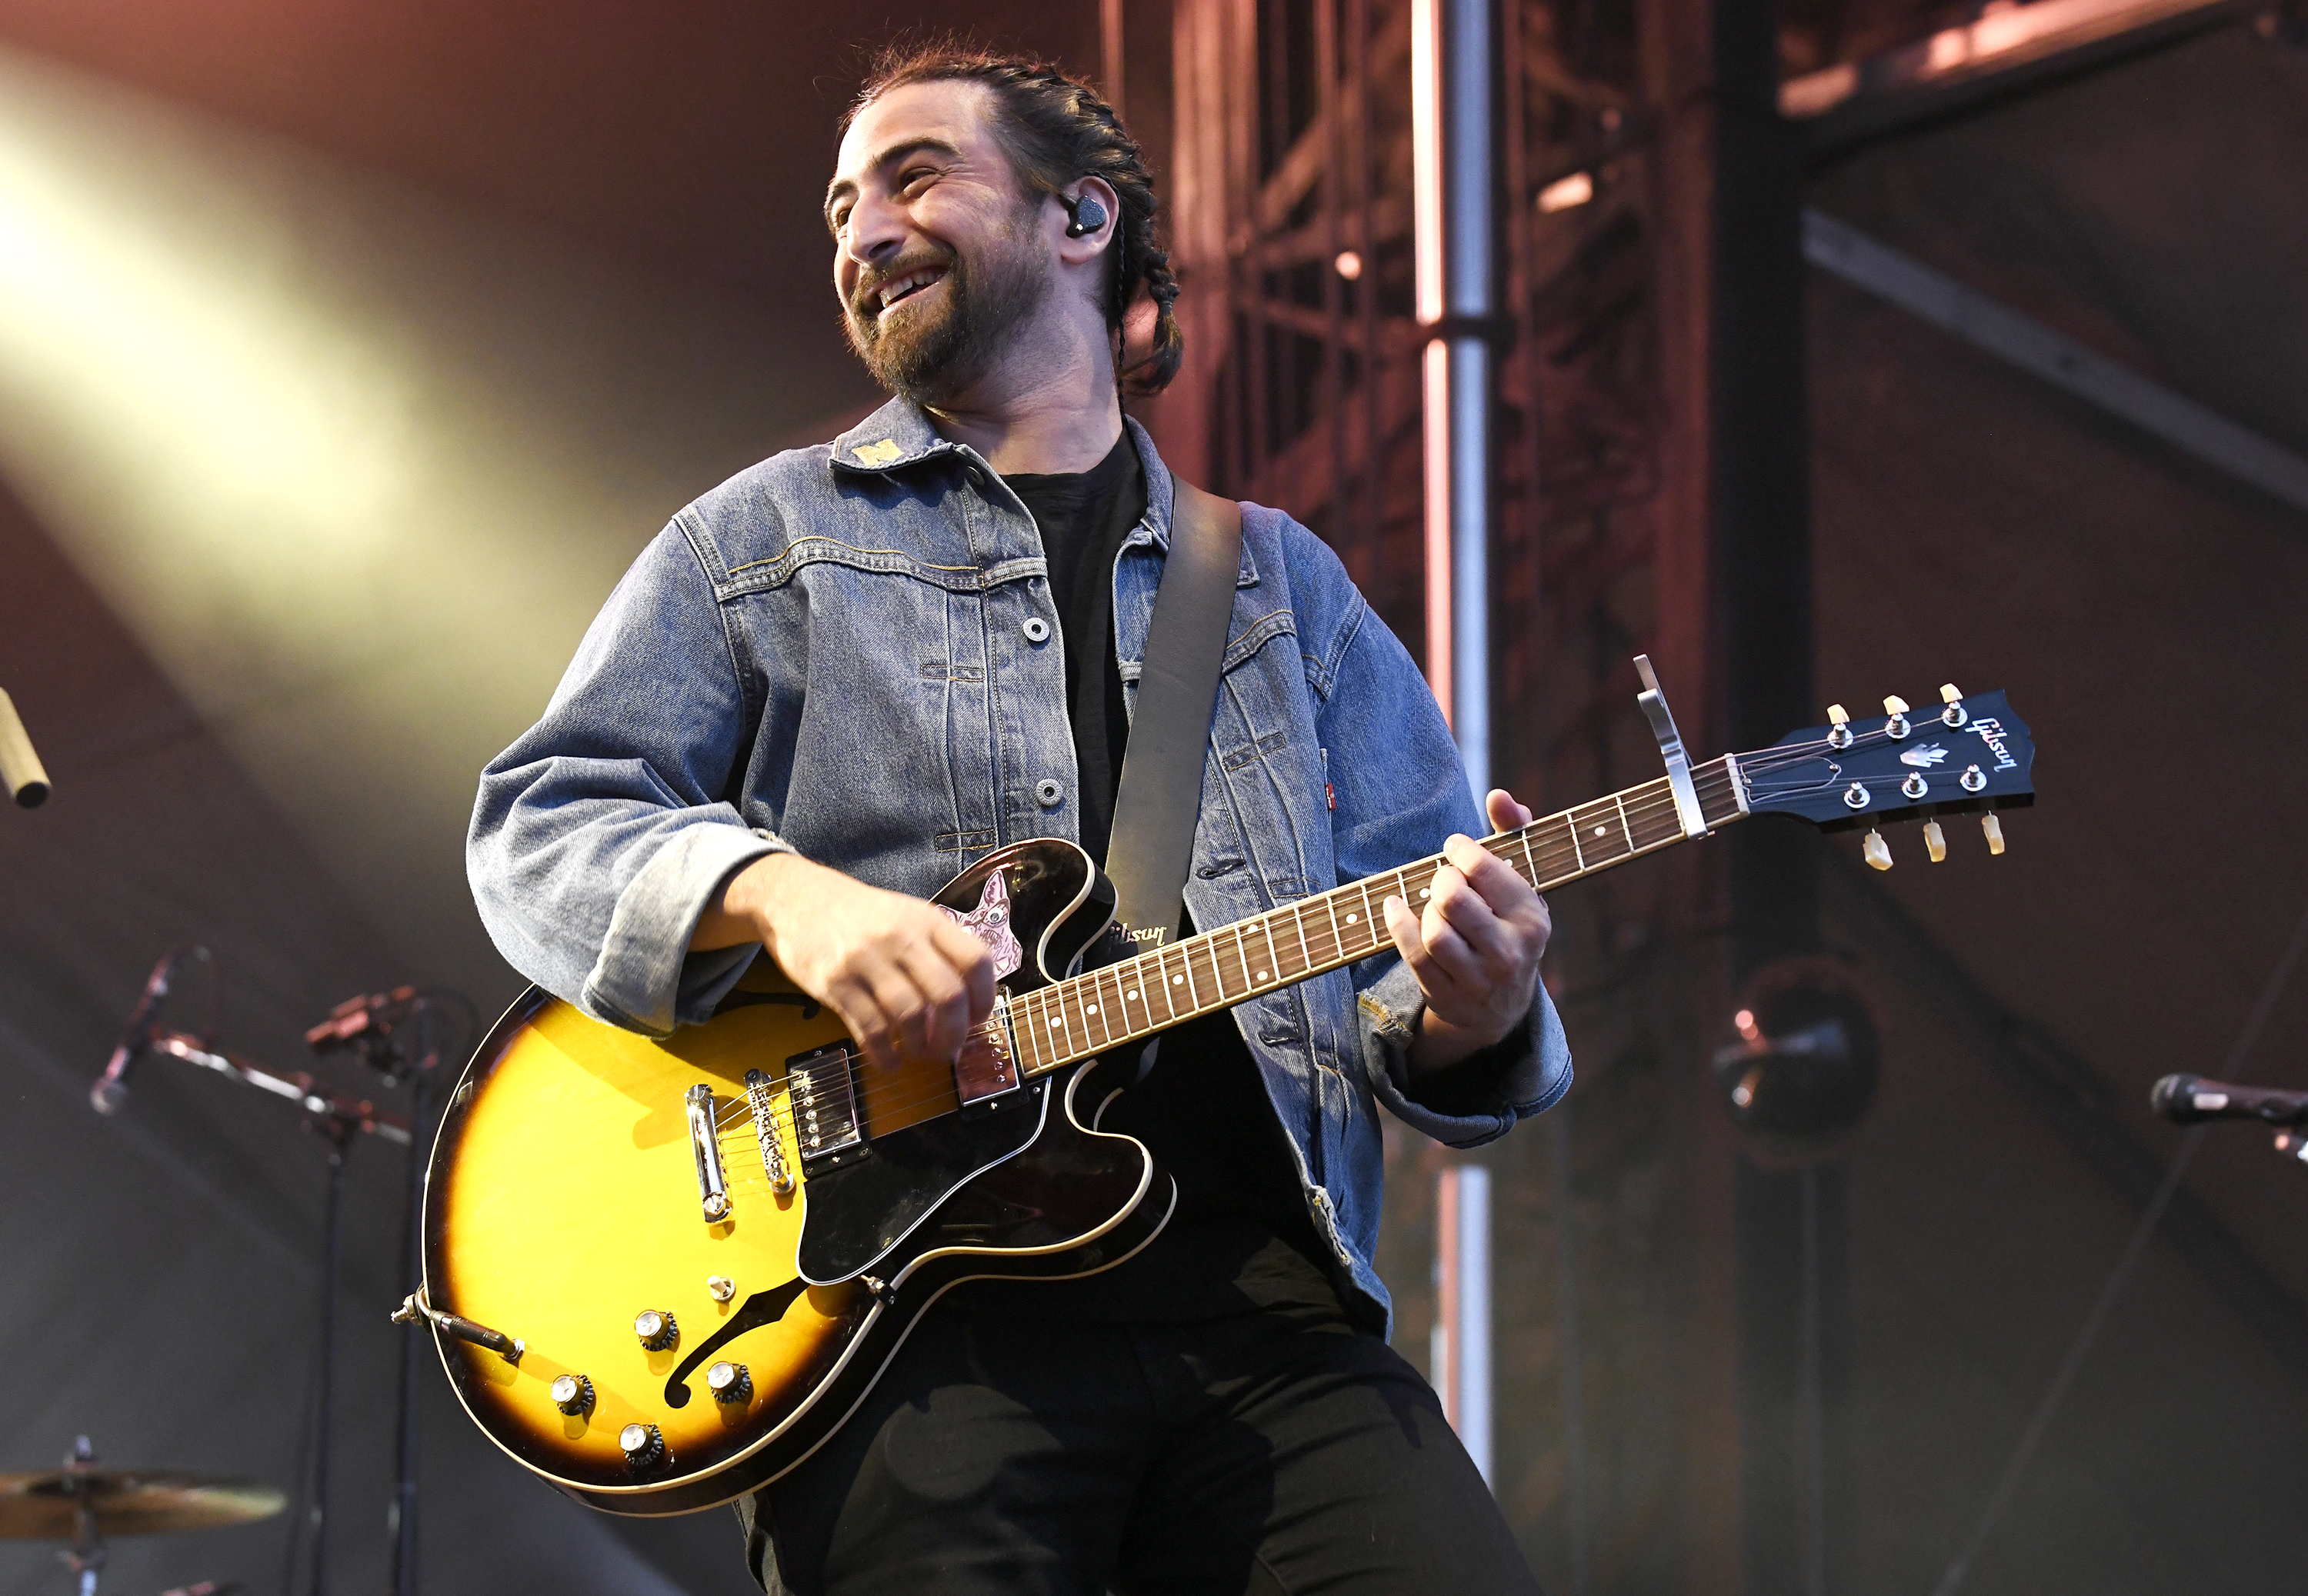 Kahan, a bearded man, with hair tied back in a braid, smiles while holding a guitar on stage.